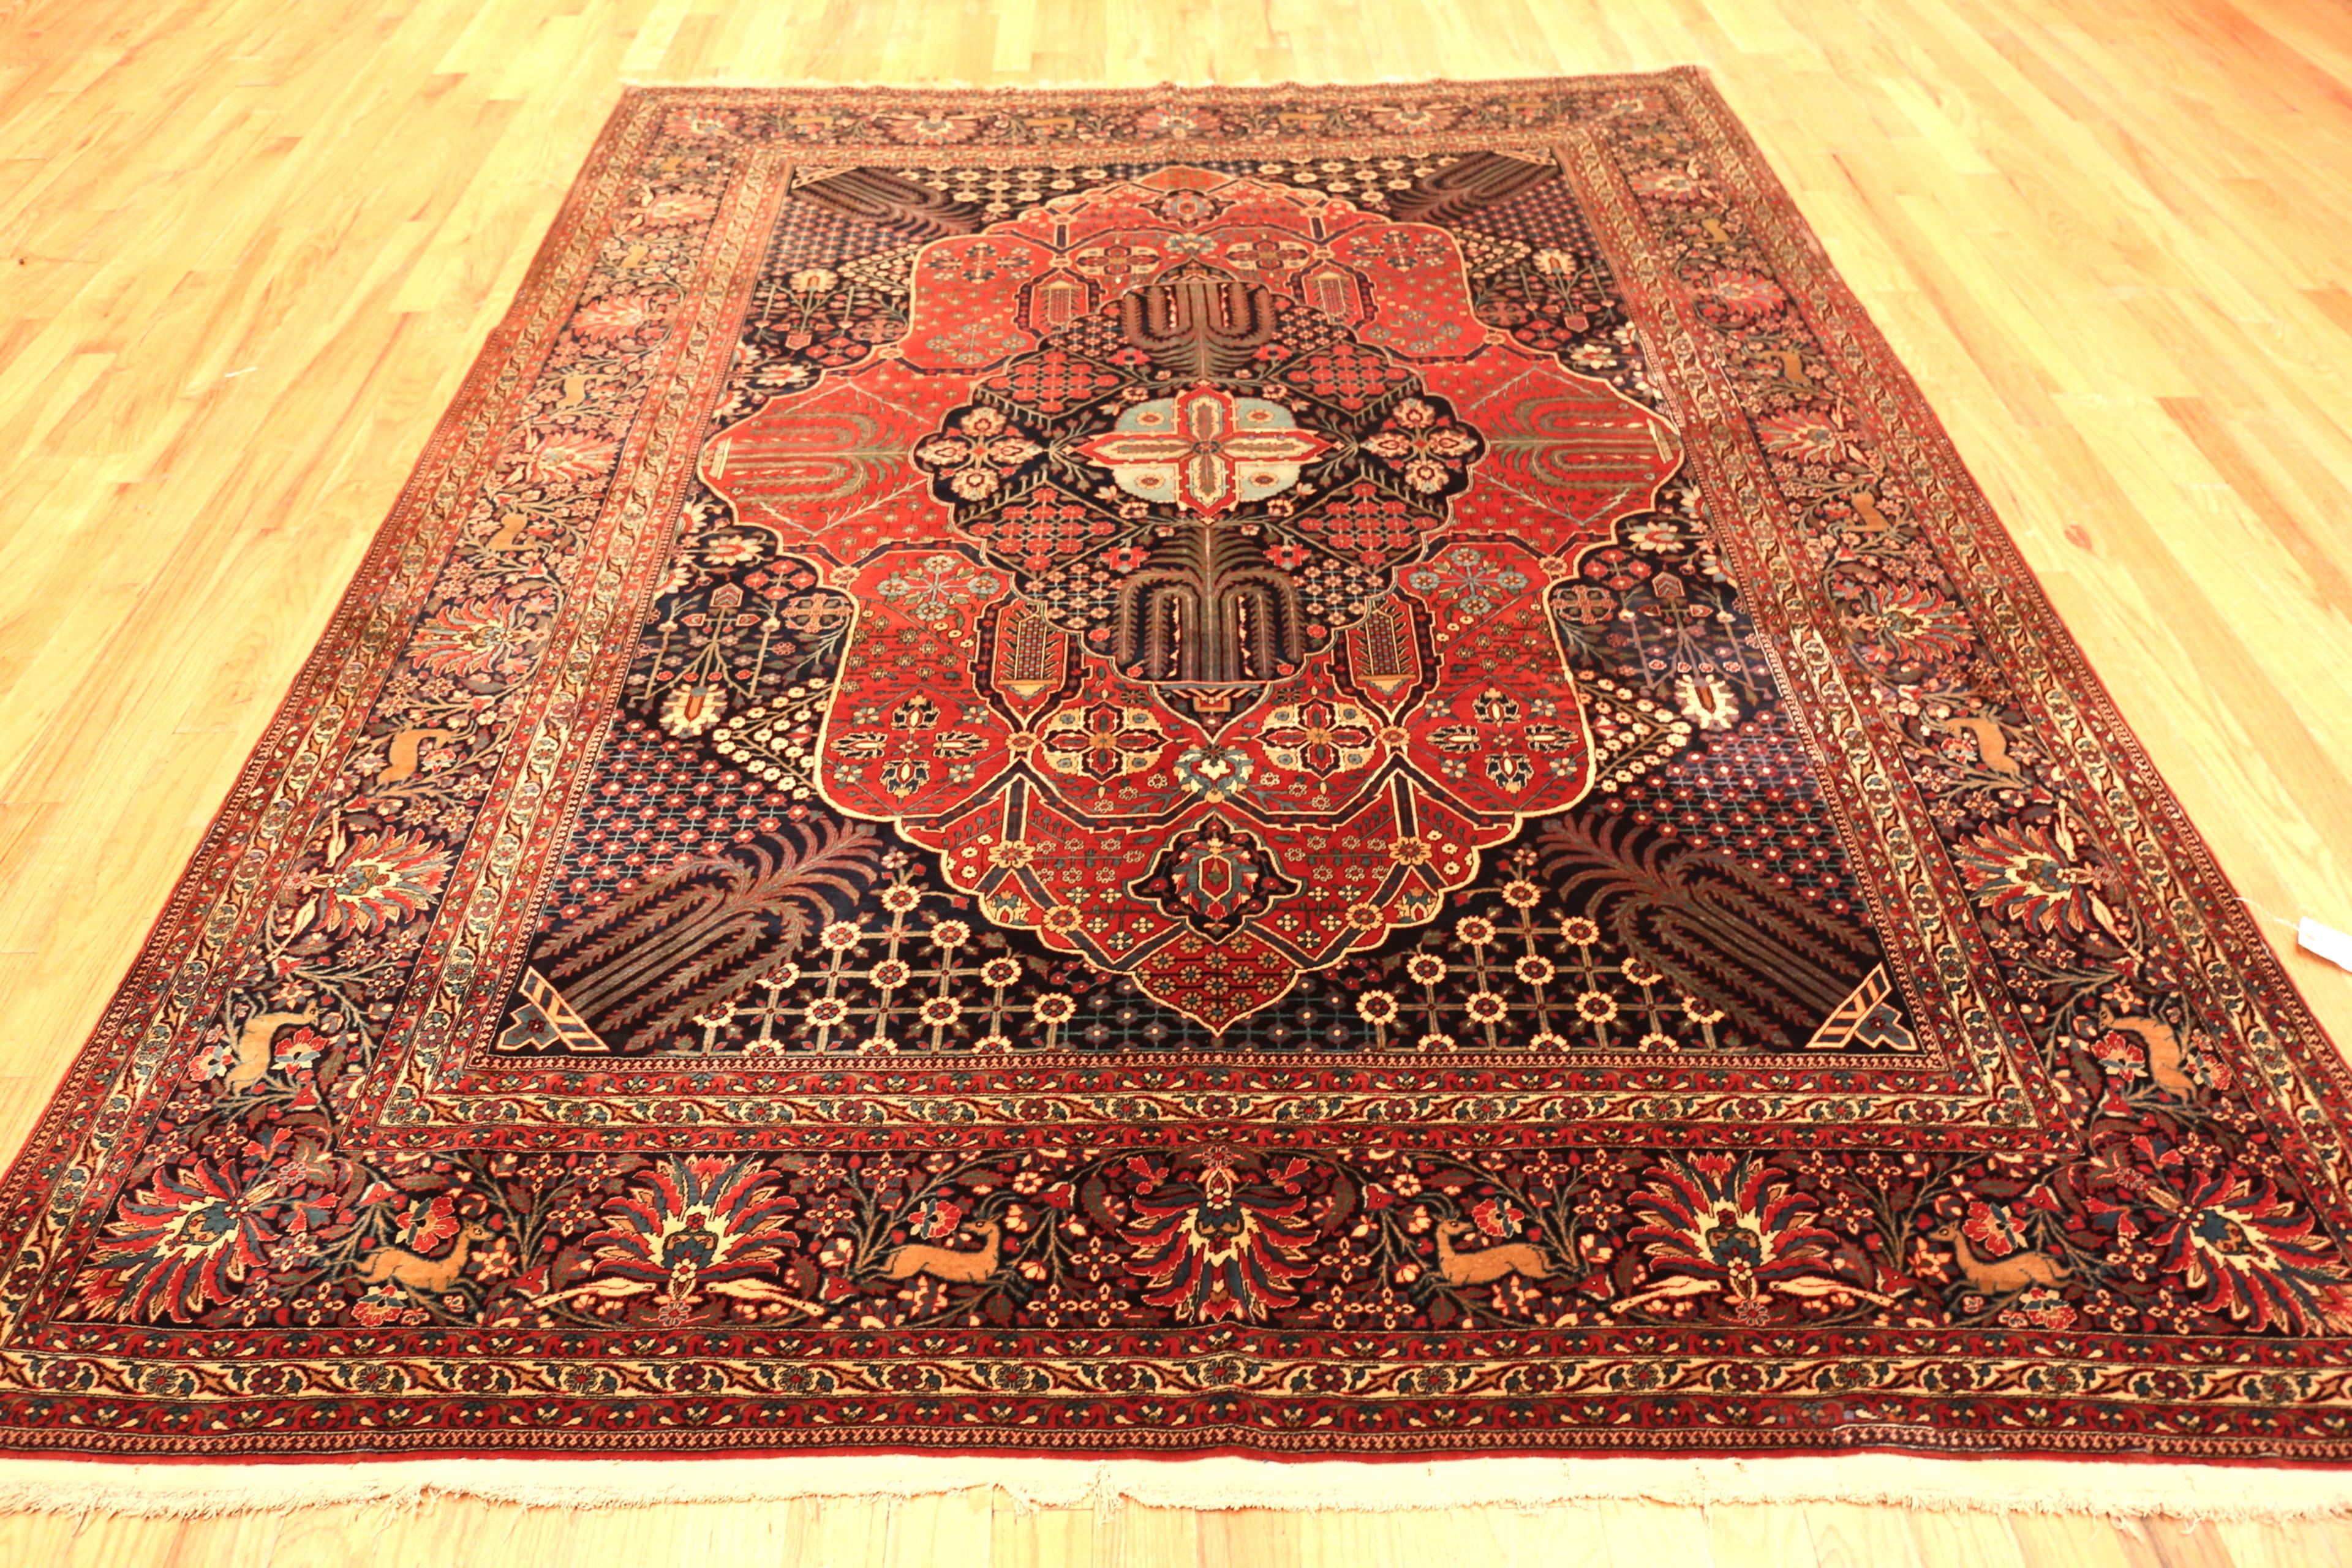 Antique Persian Mohtasham Kashan Rug, Country of origin: Persia, Circa date: 1880. Size: 7 ft 7 in x 10 ft (2.31 m x 3.05 m)

